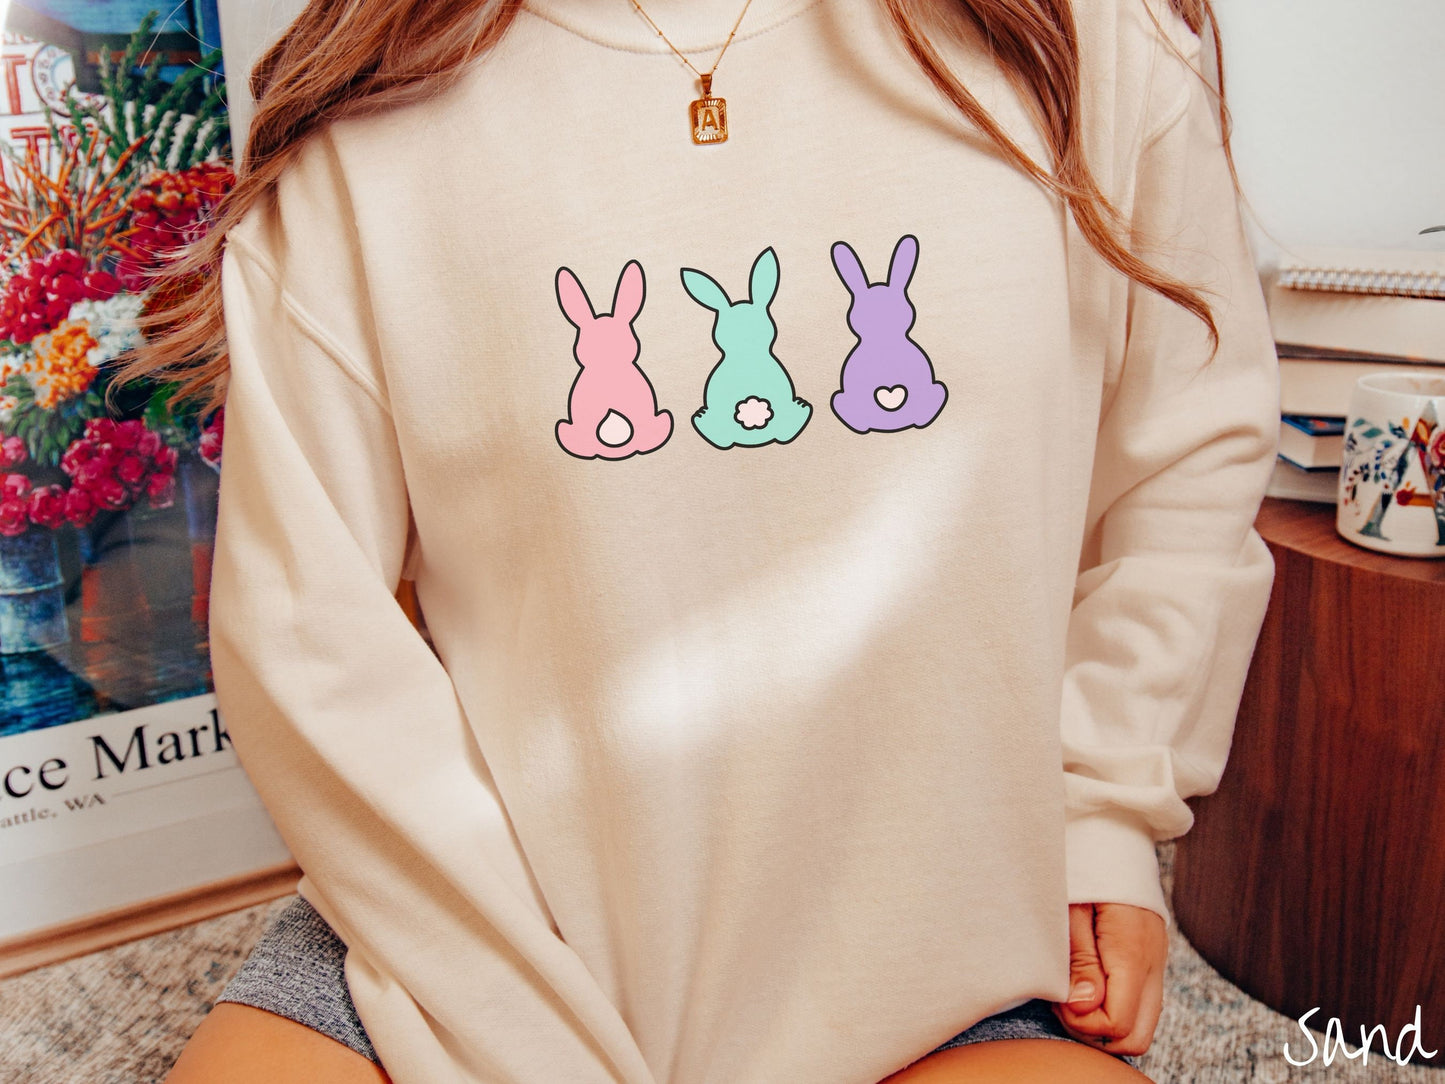 The Cute Easter Bunny Butts Sweatshirt, Gift this Sweater to your Homies Who Got your Back!